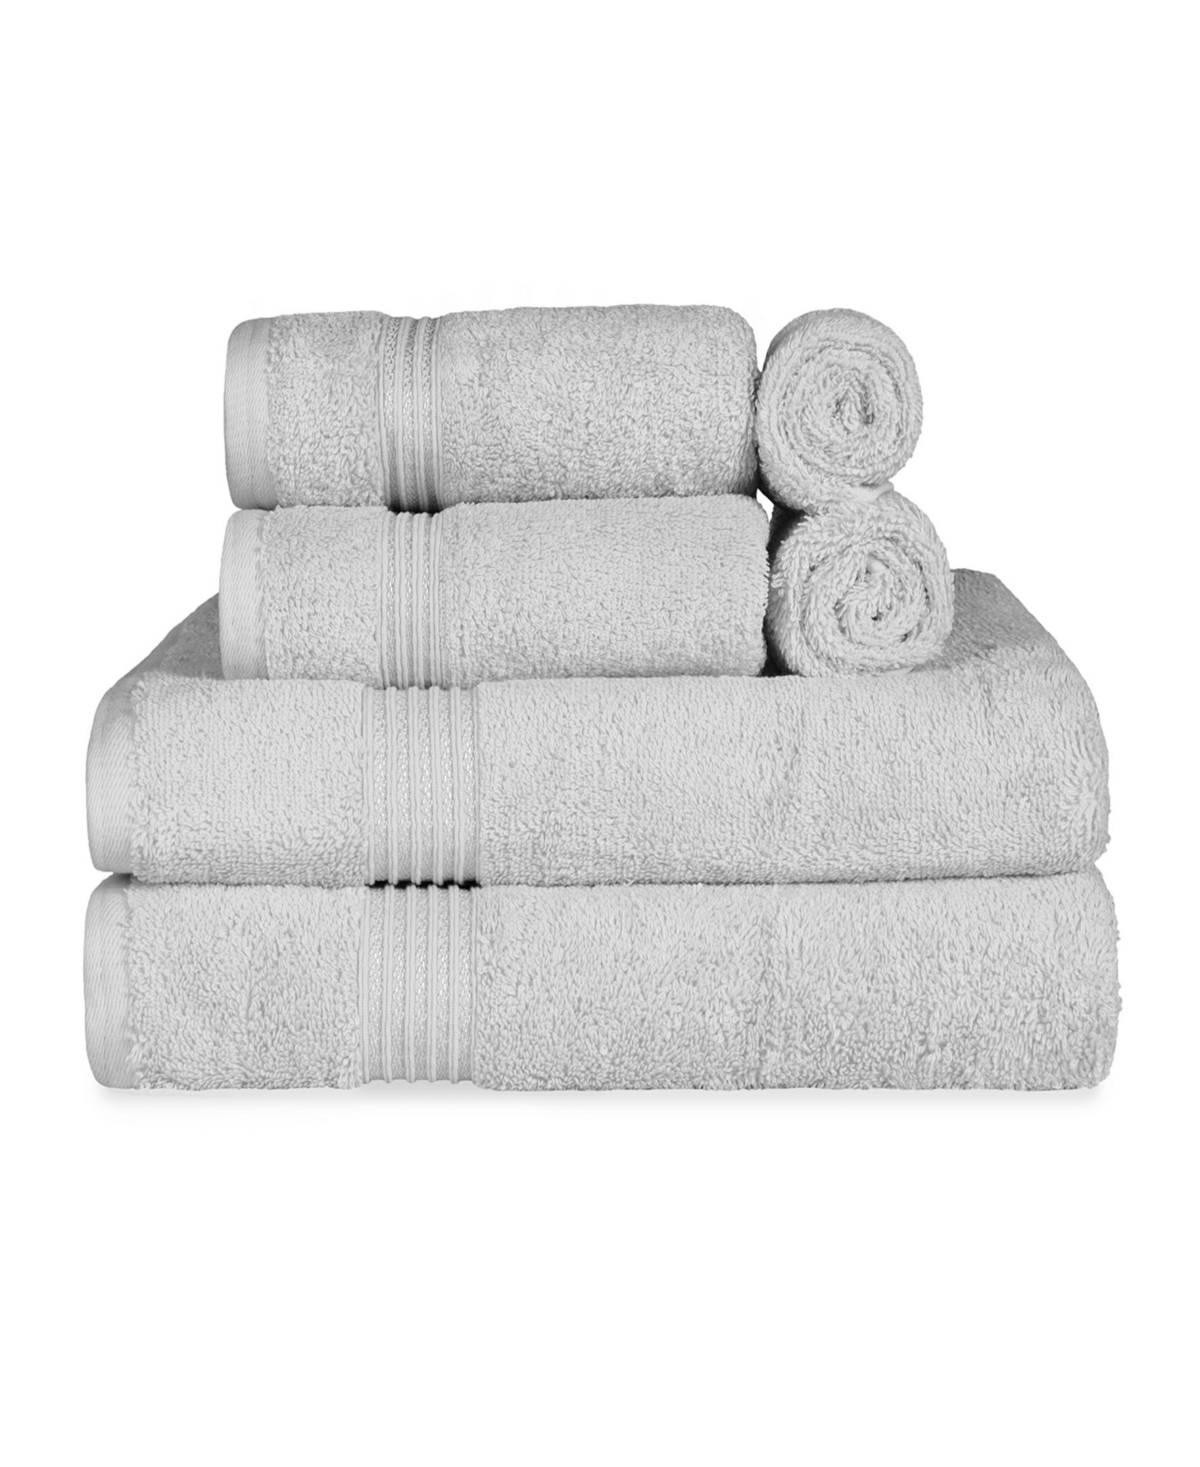 Superior Solid Quick Drying Absorbent 6 Piece Egyptian Cotton Assorted Towel Set Bedding In Silver